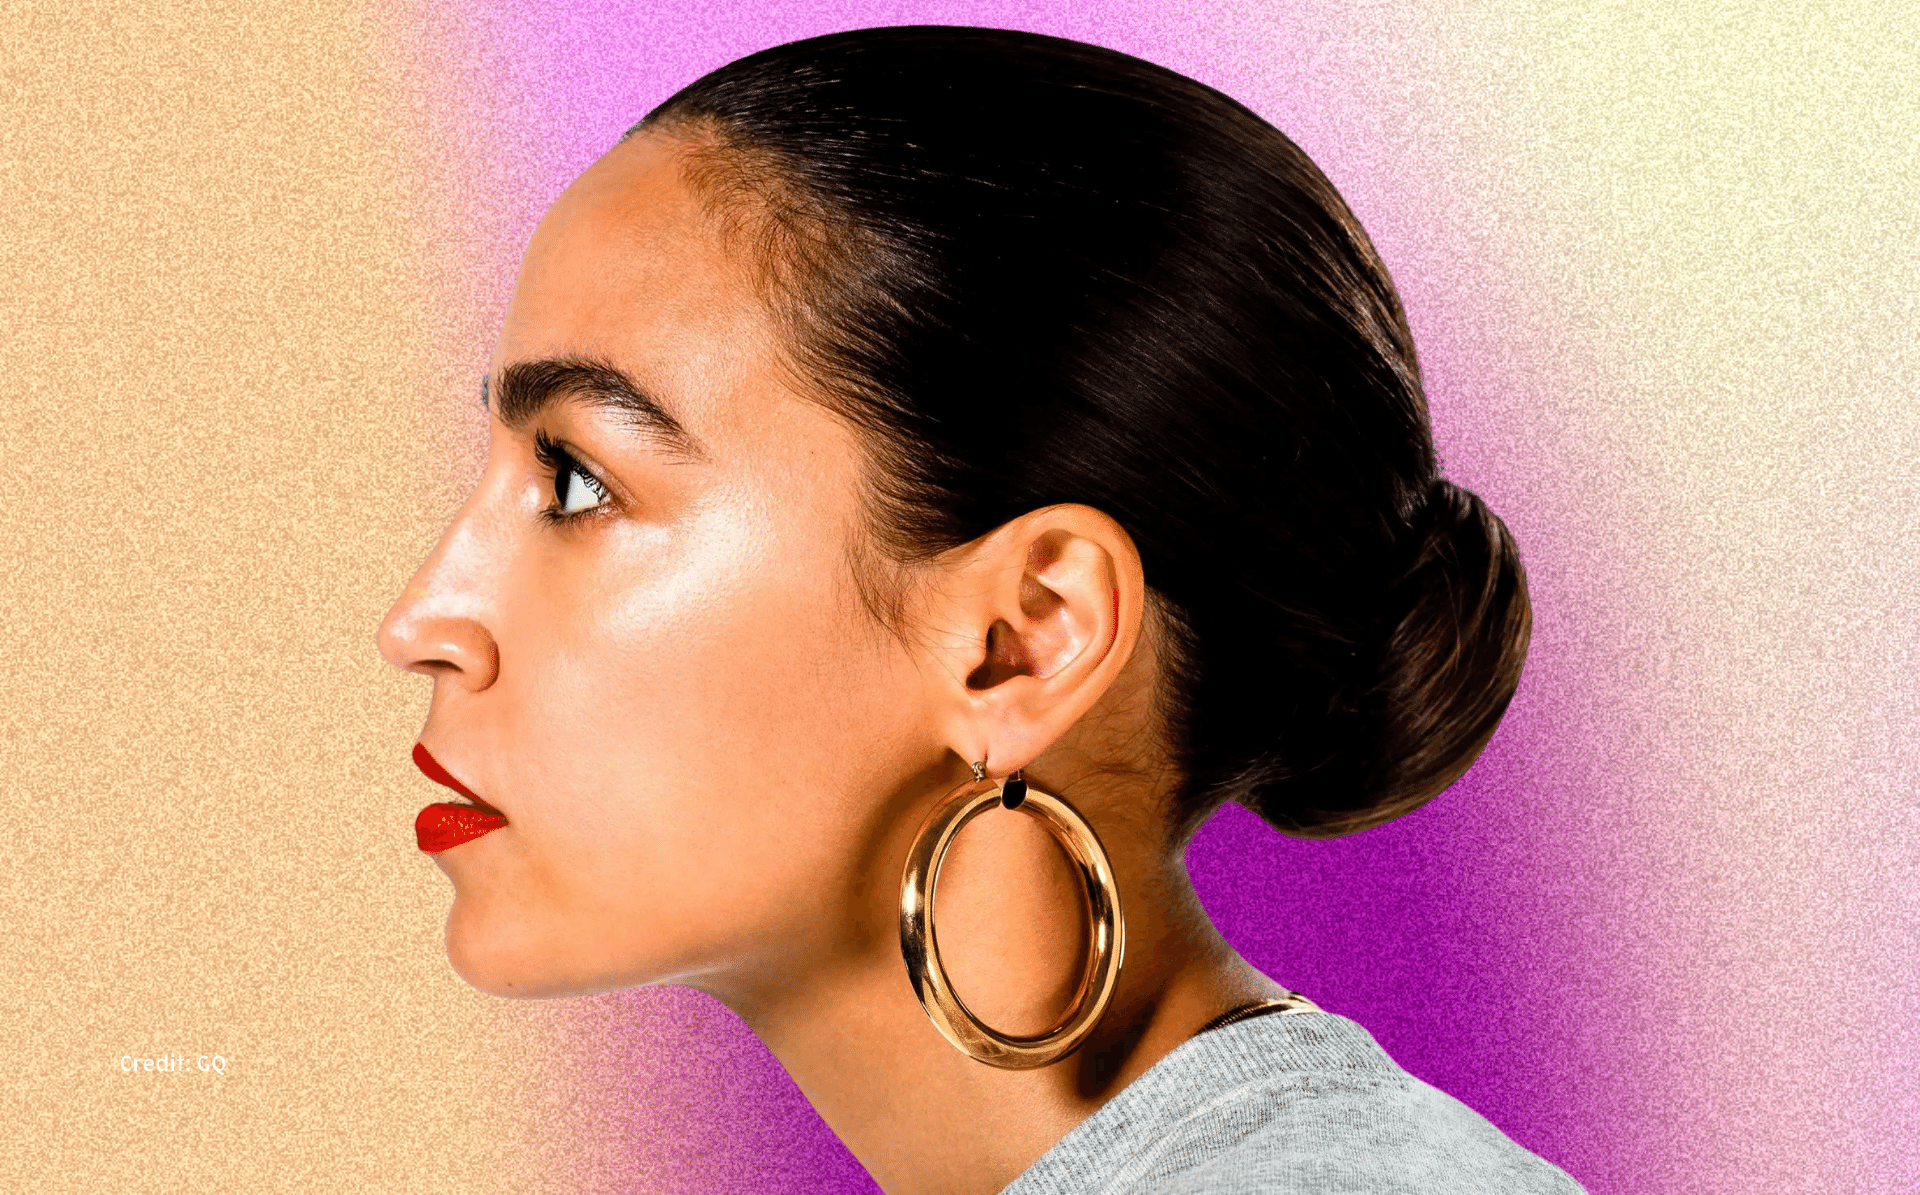 A side profile of Congresswoman Alexandria Ocasio-Cortez (D-NY-14), as shot by GQ. She is facing the left, has her hair in a slicked back low bun. She is wearing a red lip with a natural glow to her face, and is wearing large gold hoops. She is wearing a grey sweatshirt. Behind her is a peach and purple gradient grainy background.